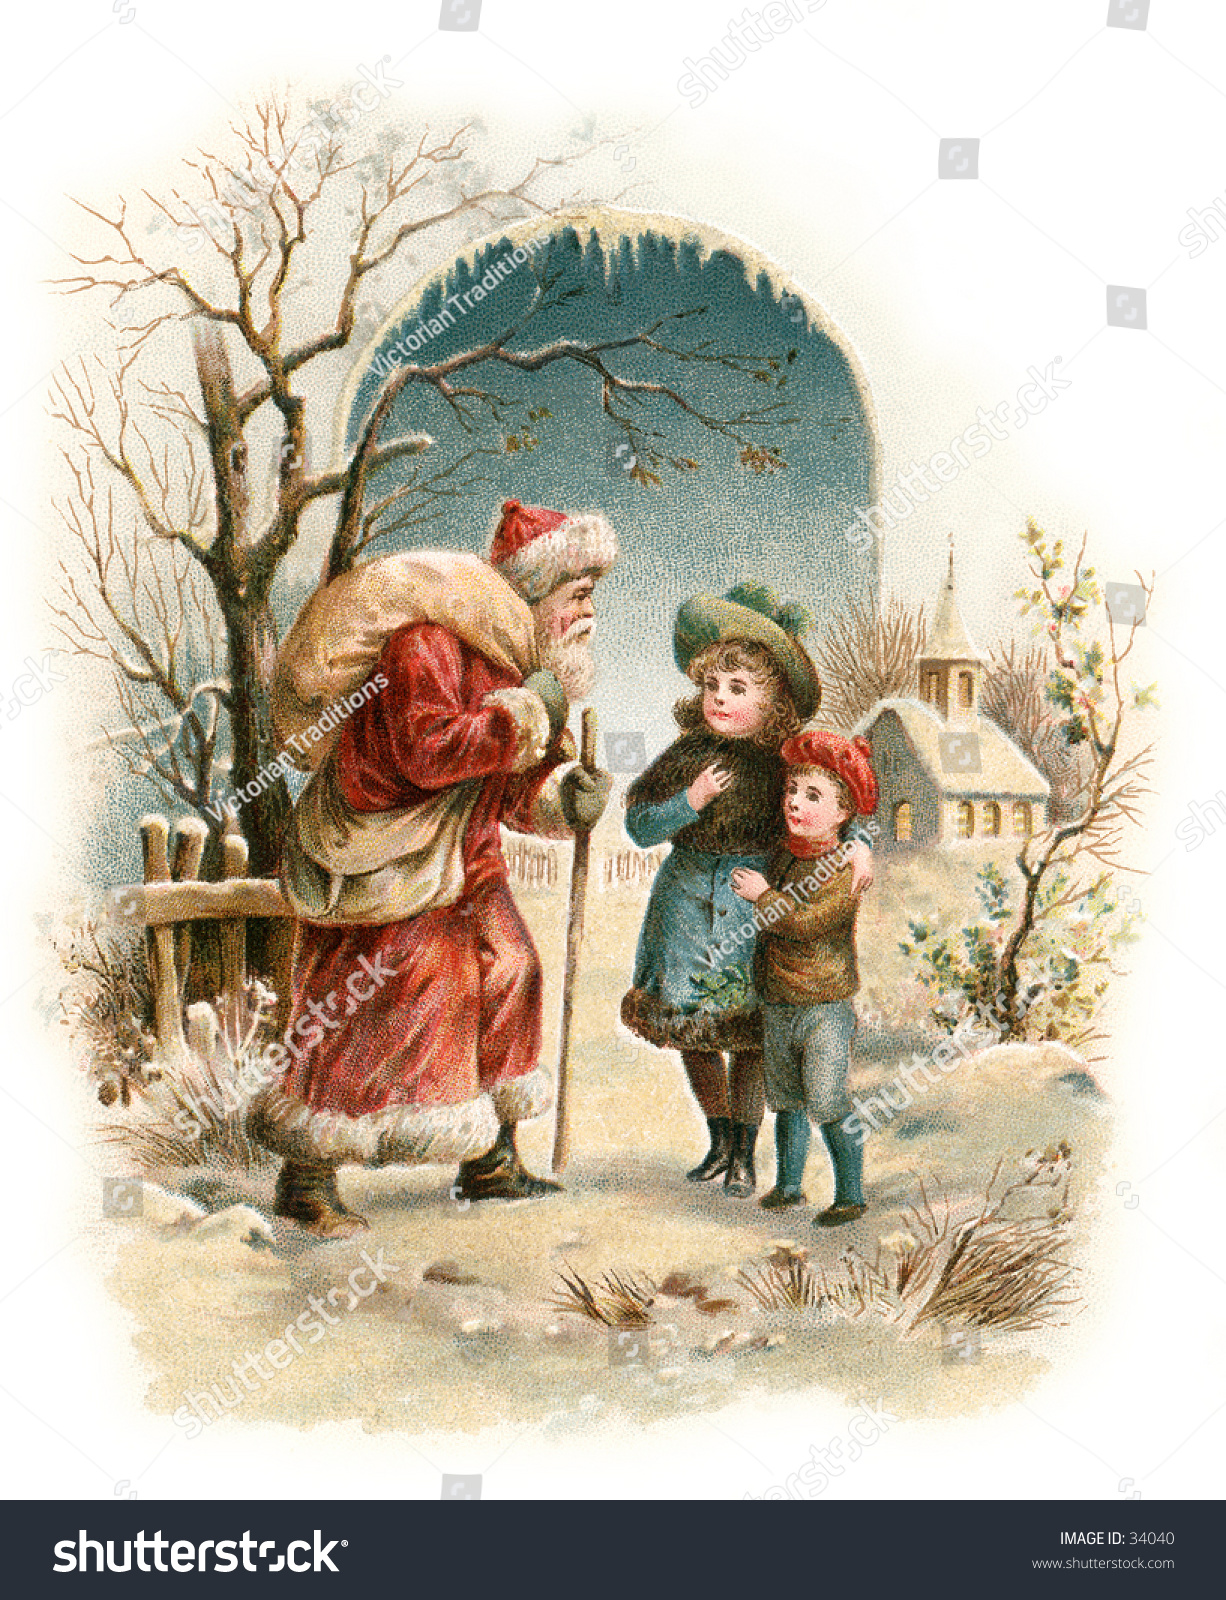 A Visit From Saint Nicholas - An Early 1900s Vintage Greeting Card ...